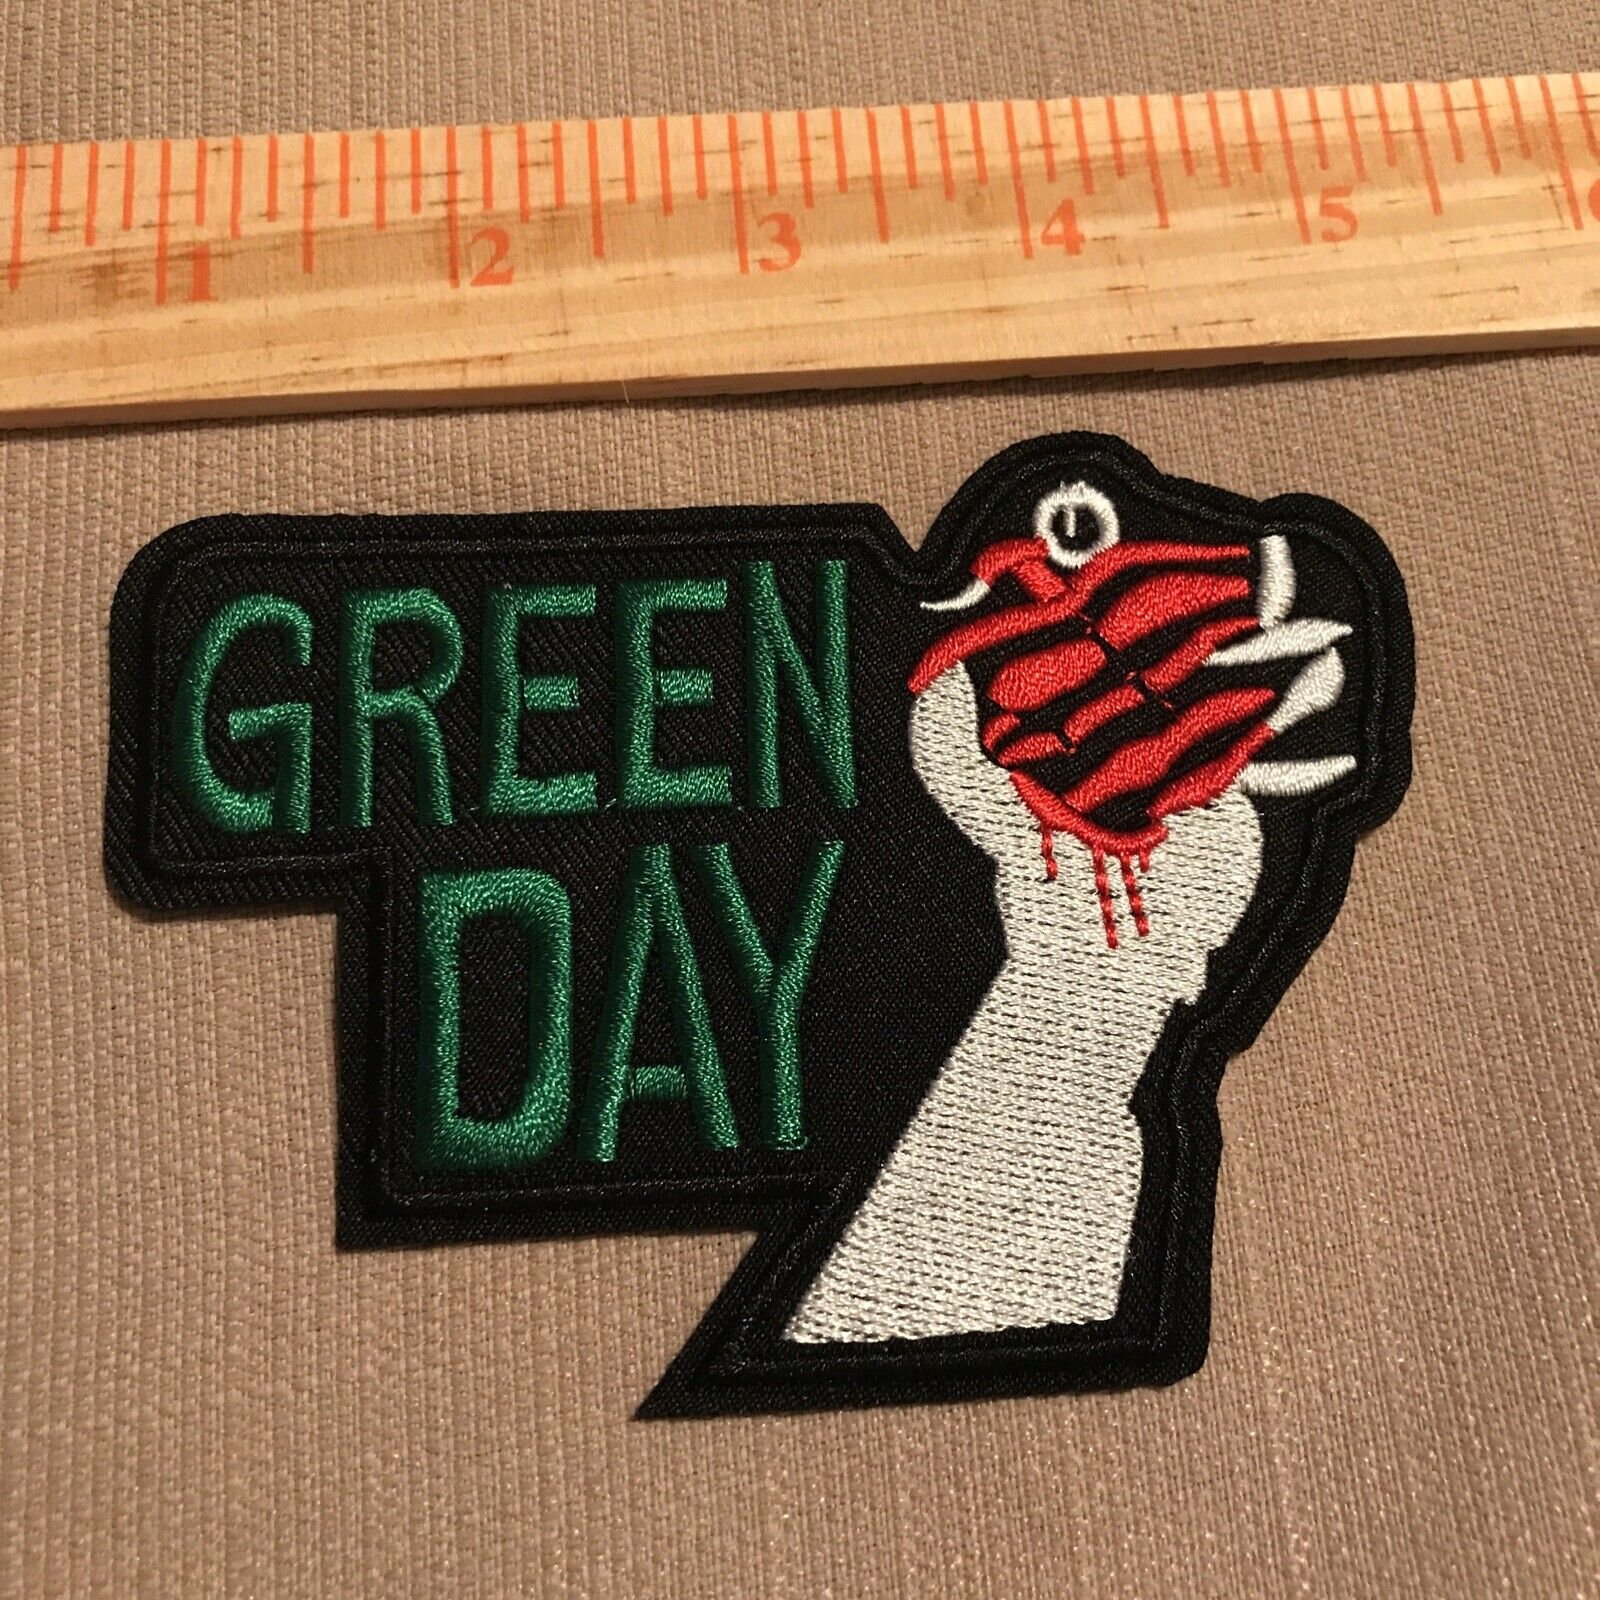 Green Day Embroidered Patch Iron/on Gernade Heart 4 1/2" X 3" New Never Used #2